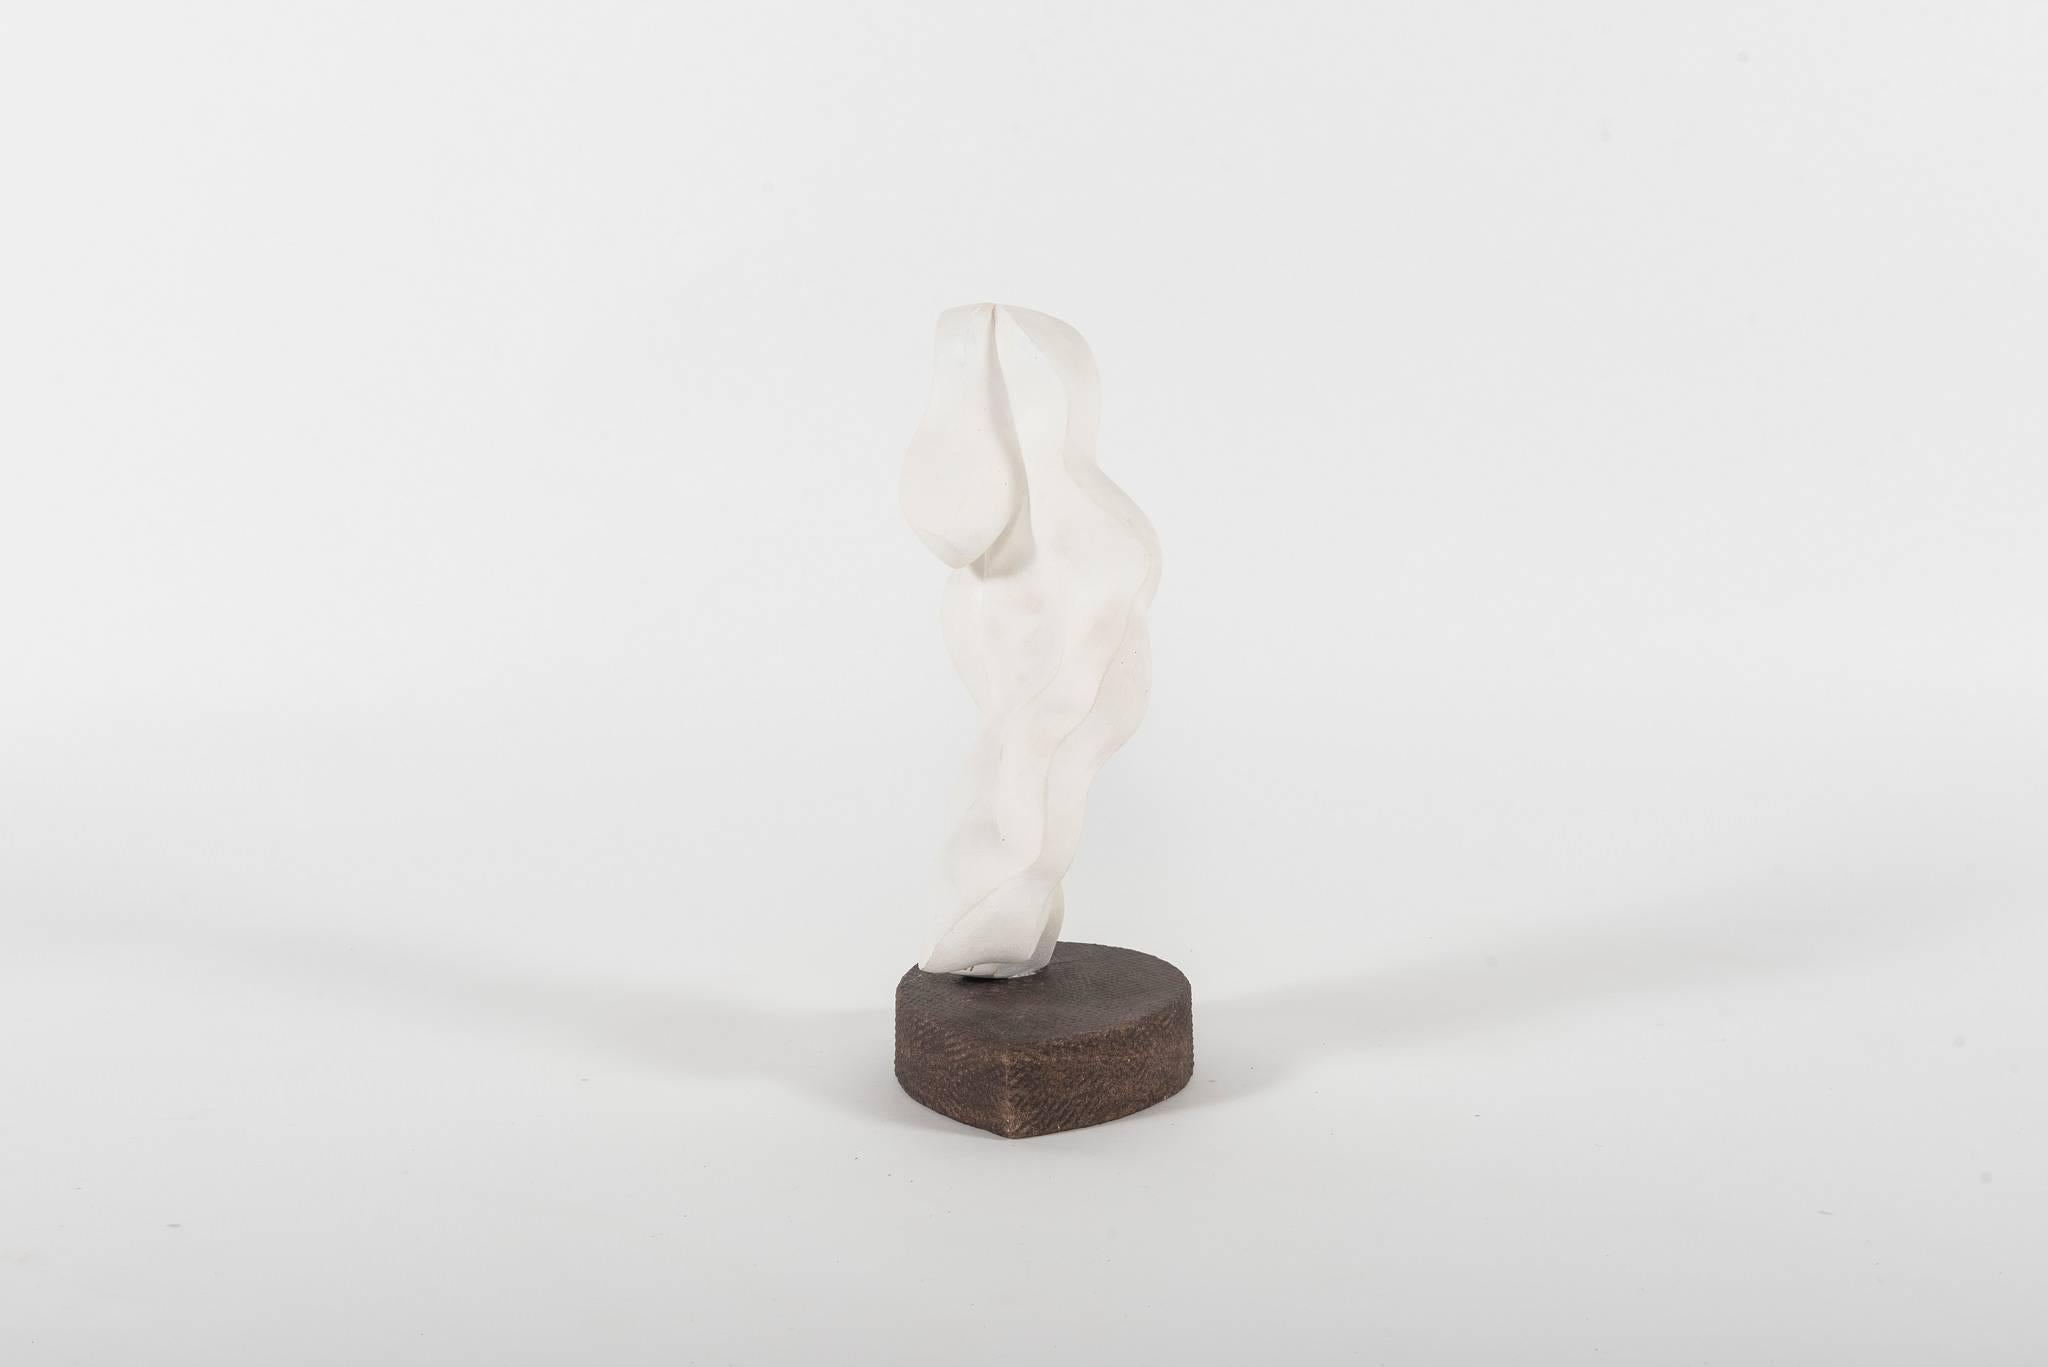 A lovely vintage white biomorphic plaster sculpture on artist's base. This abstract sculpture is in two pieces, the body is dowelled at the bottom which fits into hole in the base, and is signed HN '91.